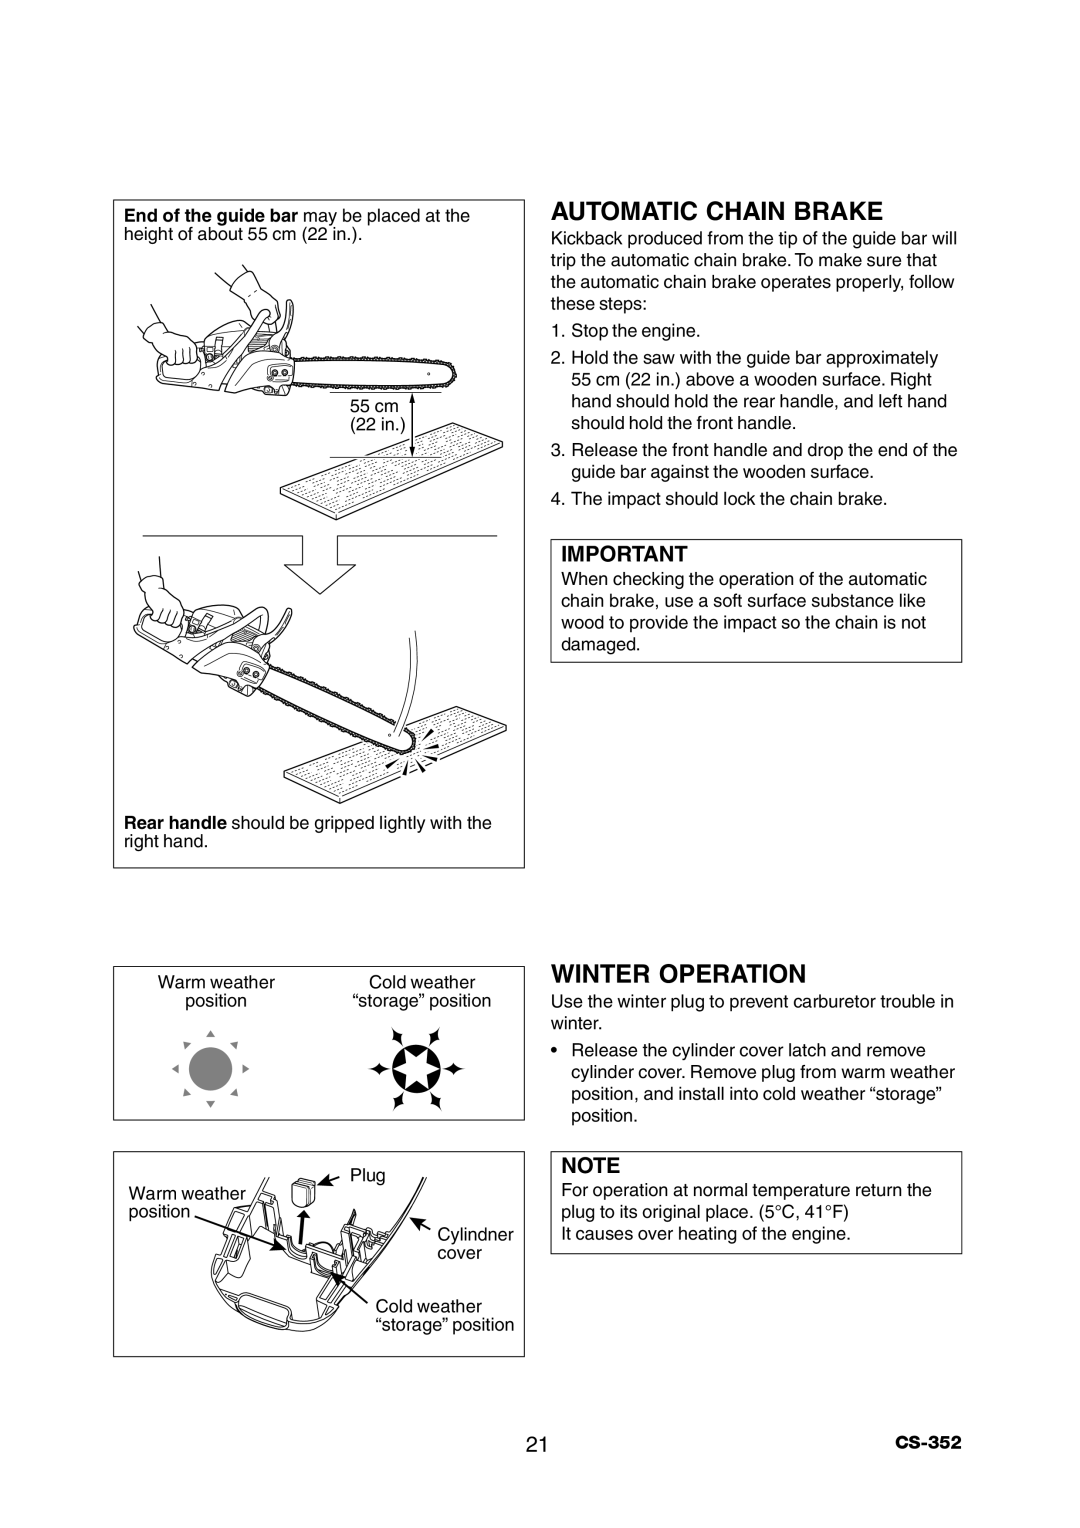 Echo CS-352 Automatic Chain Brake, Winter Operation, End of the guide bar may be placed at the height of about 55 cm 22 in 